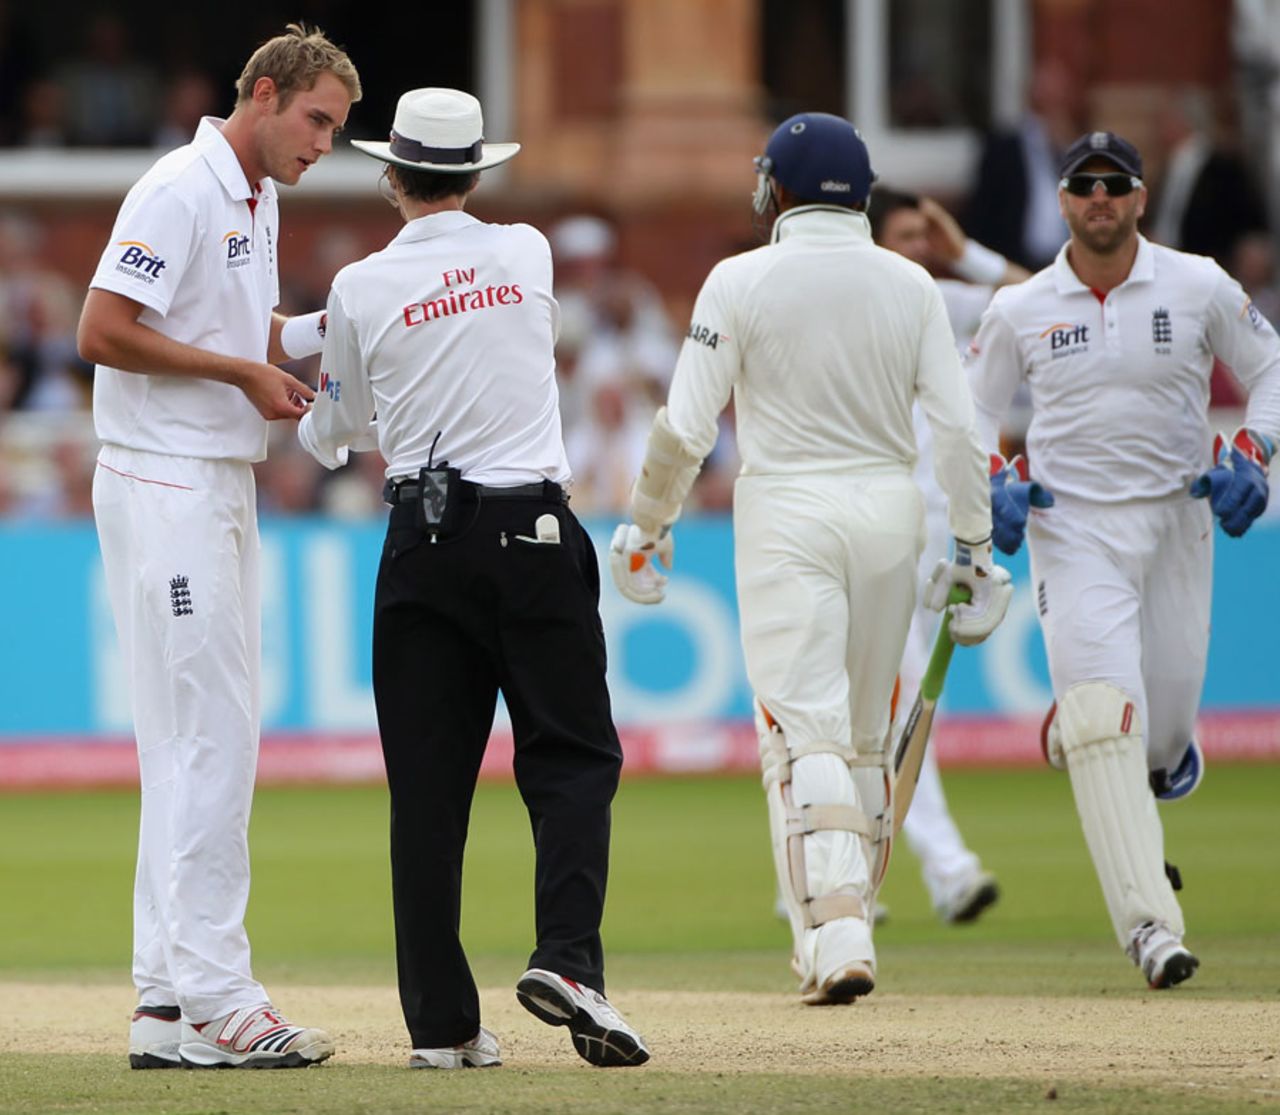 Stuart Broad talks to Billy Bowden after having an lbw appeal turned down, England v India, 1st Test, Lord's, 5th day, July 25, 2011